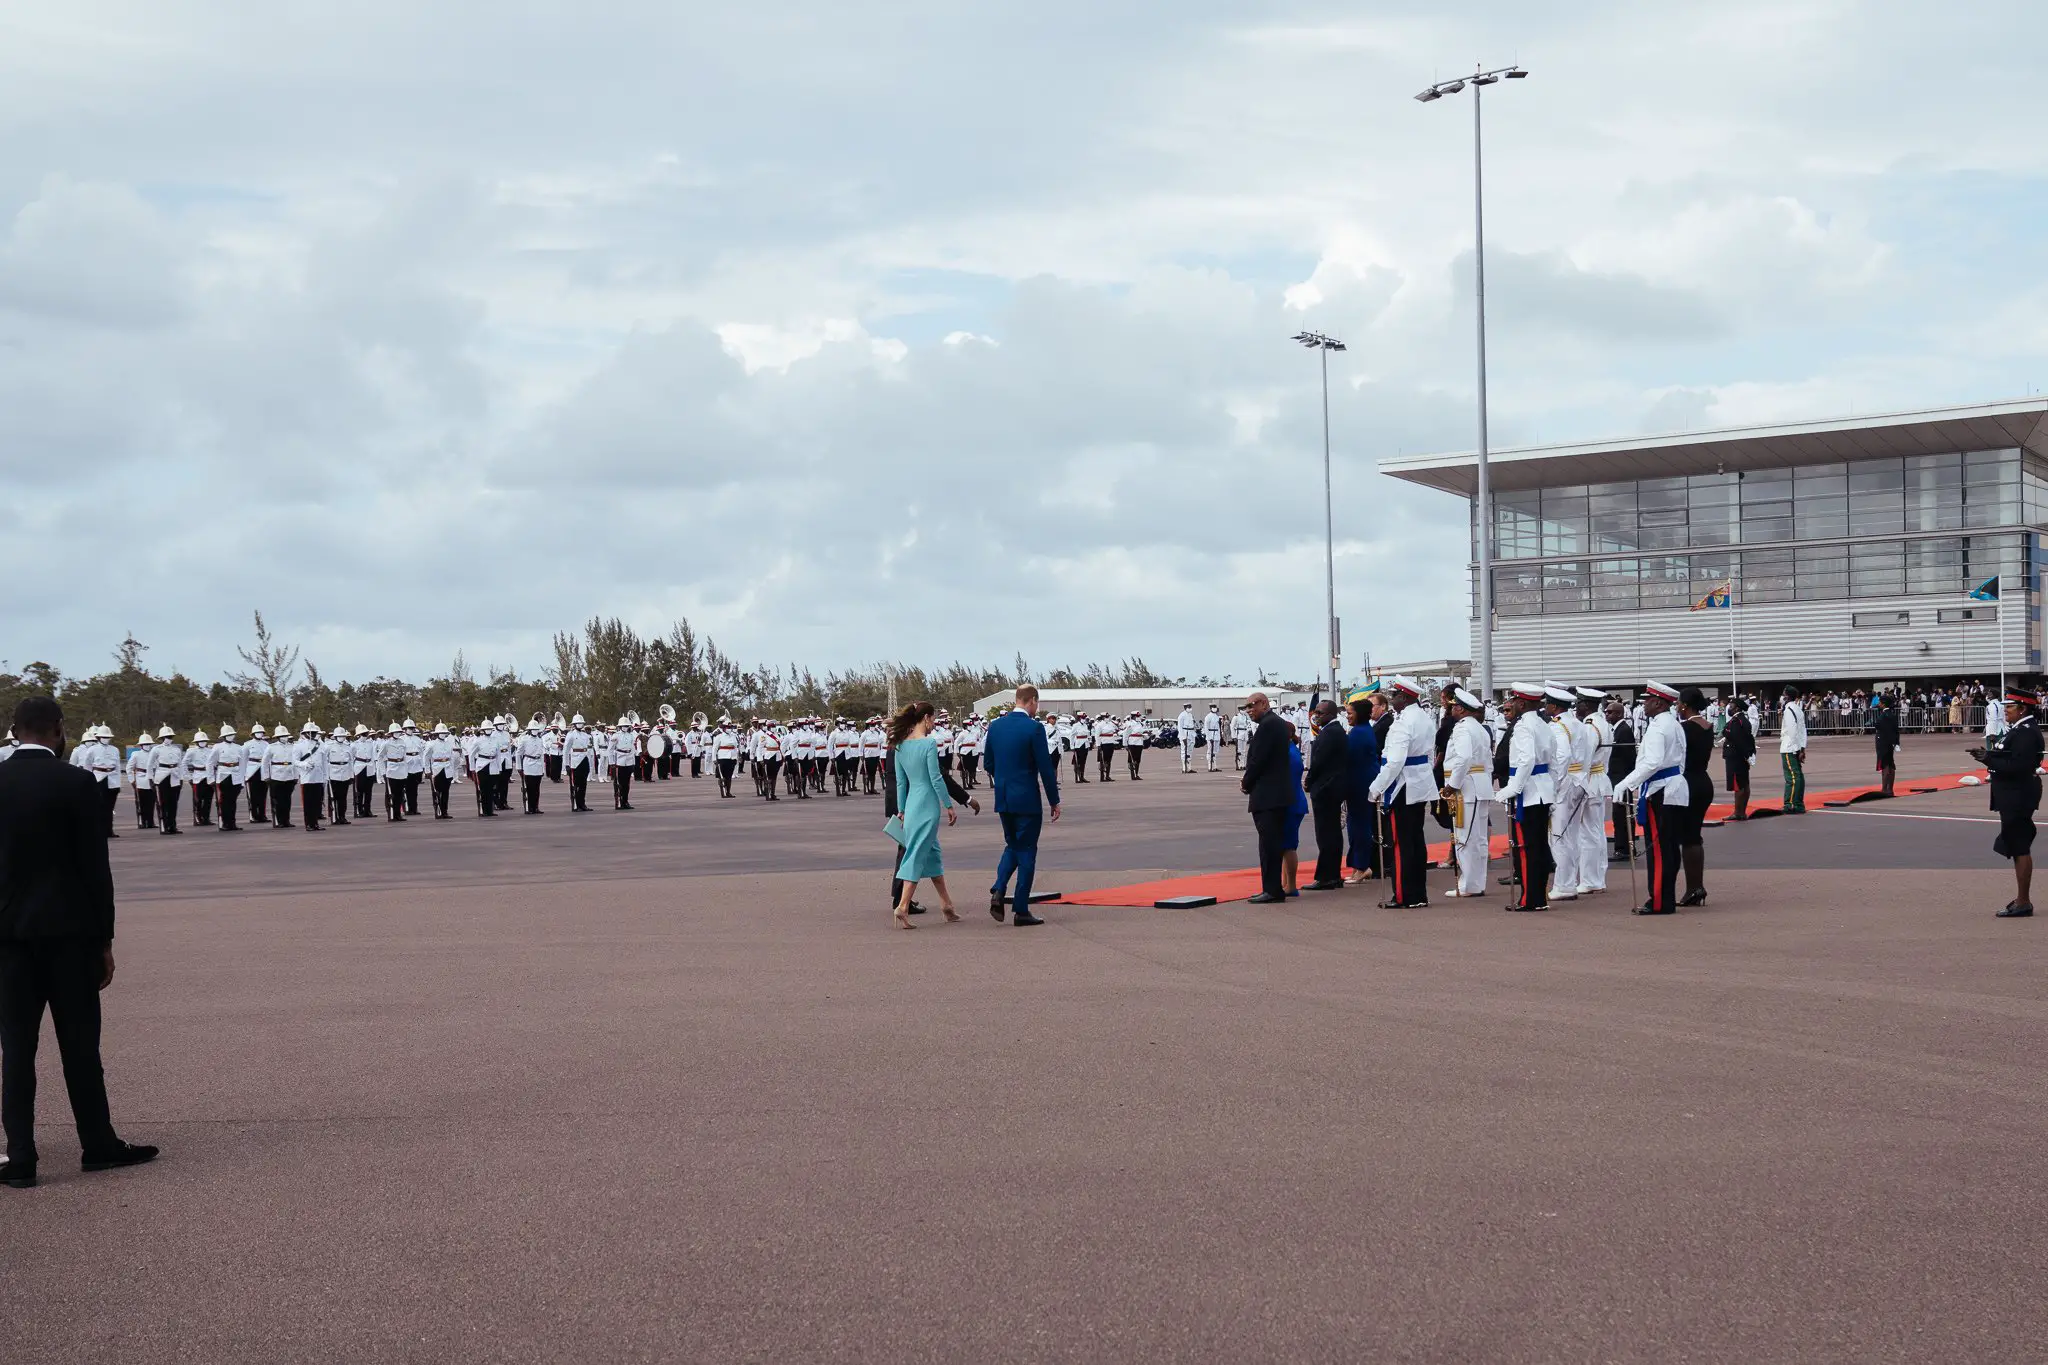 The Duke and Duchess of Cambridge arrived in Bahamas